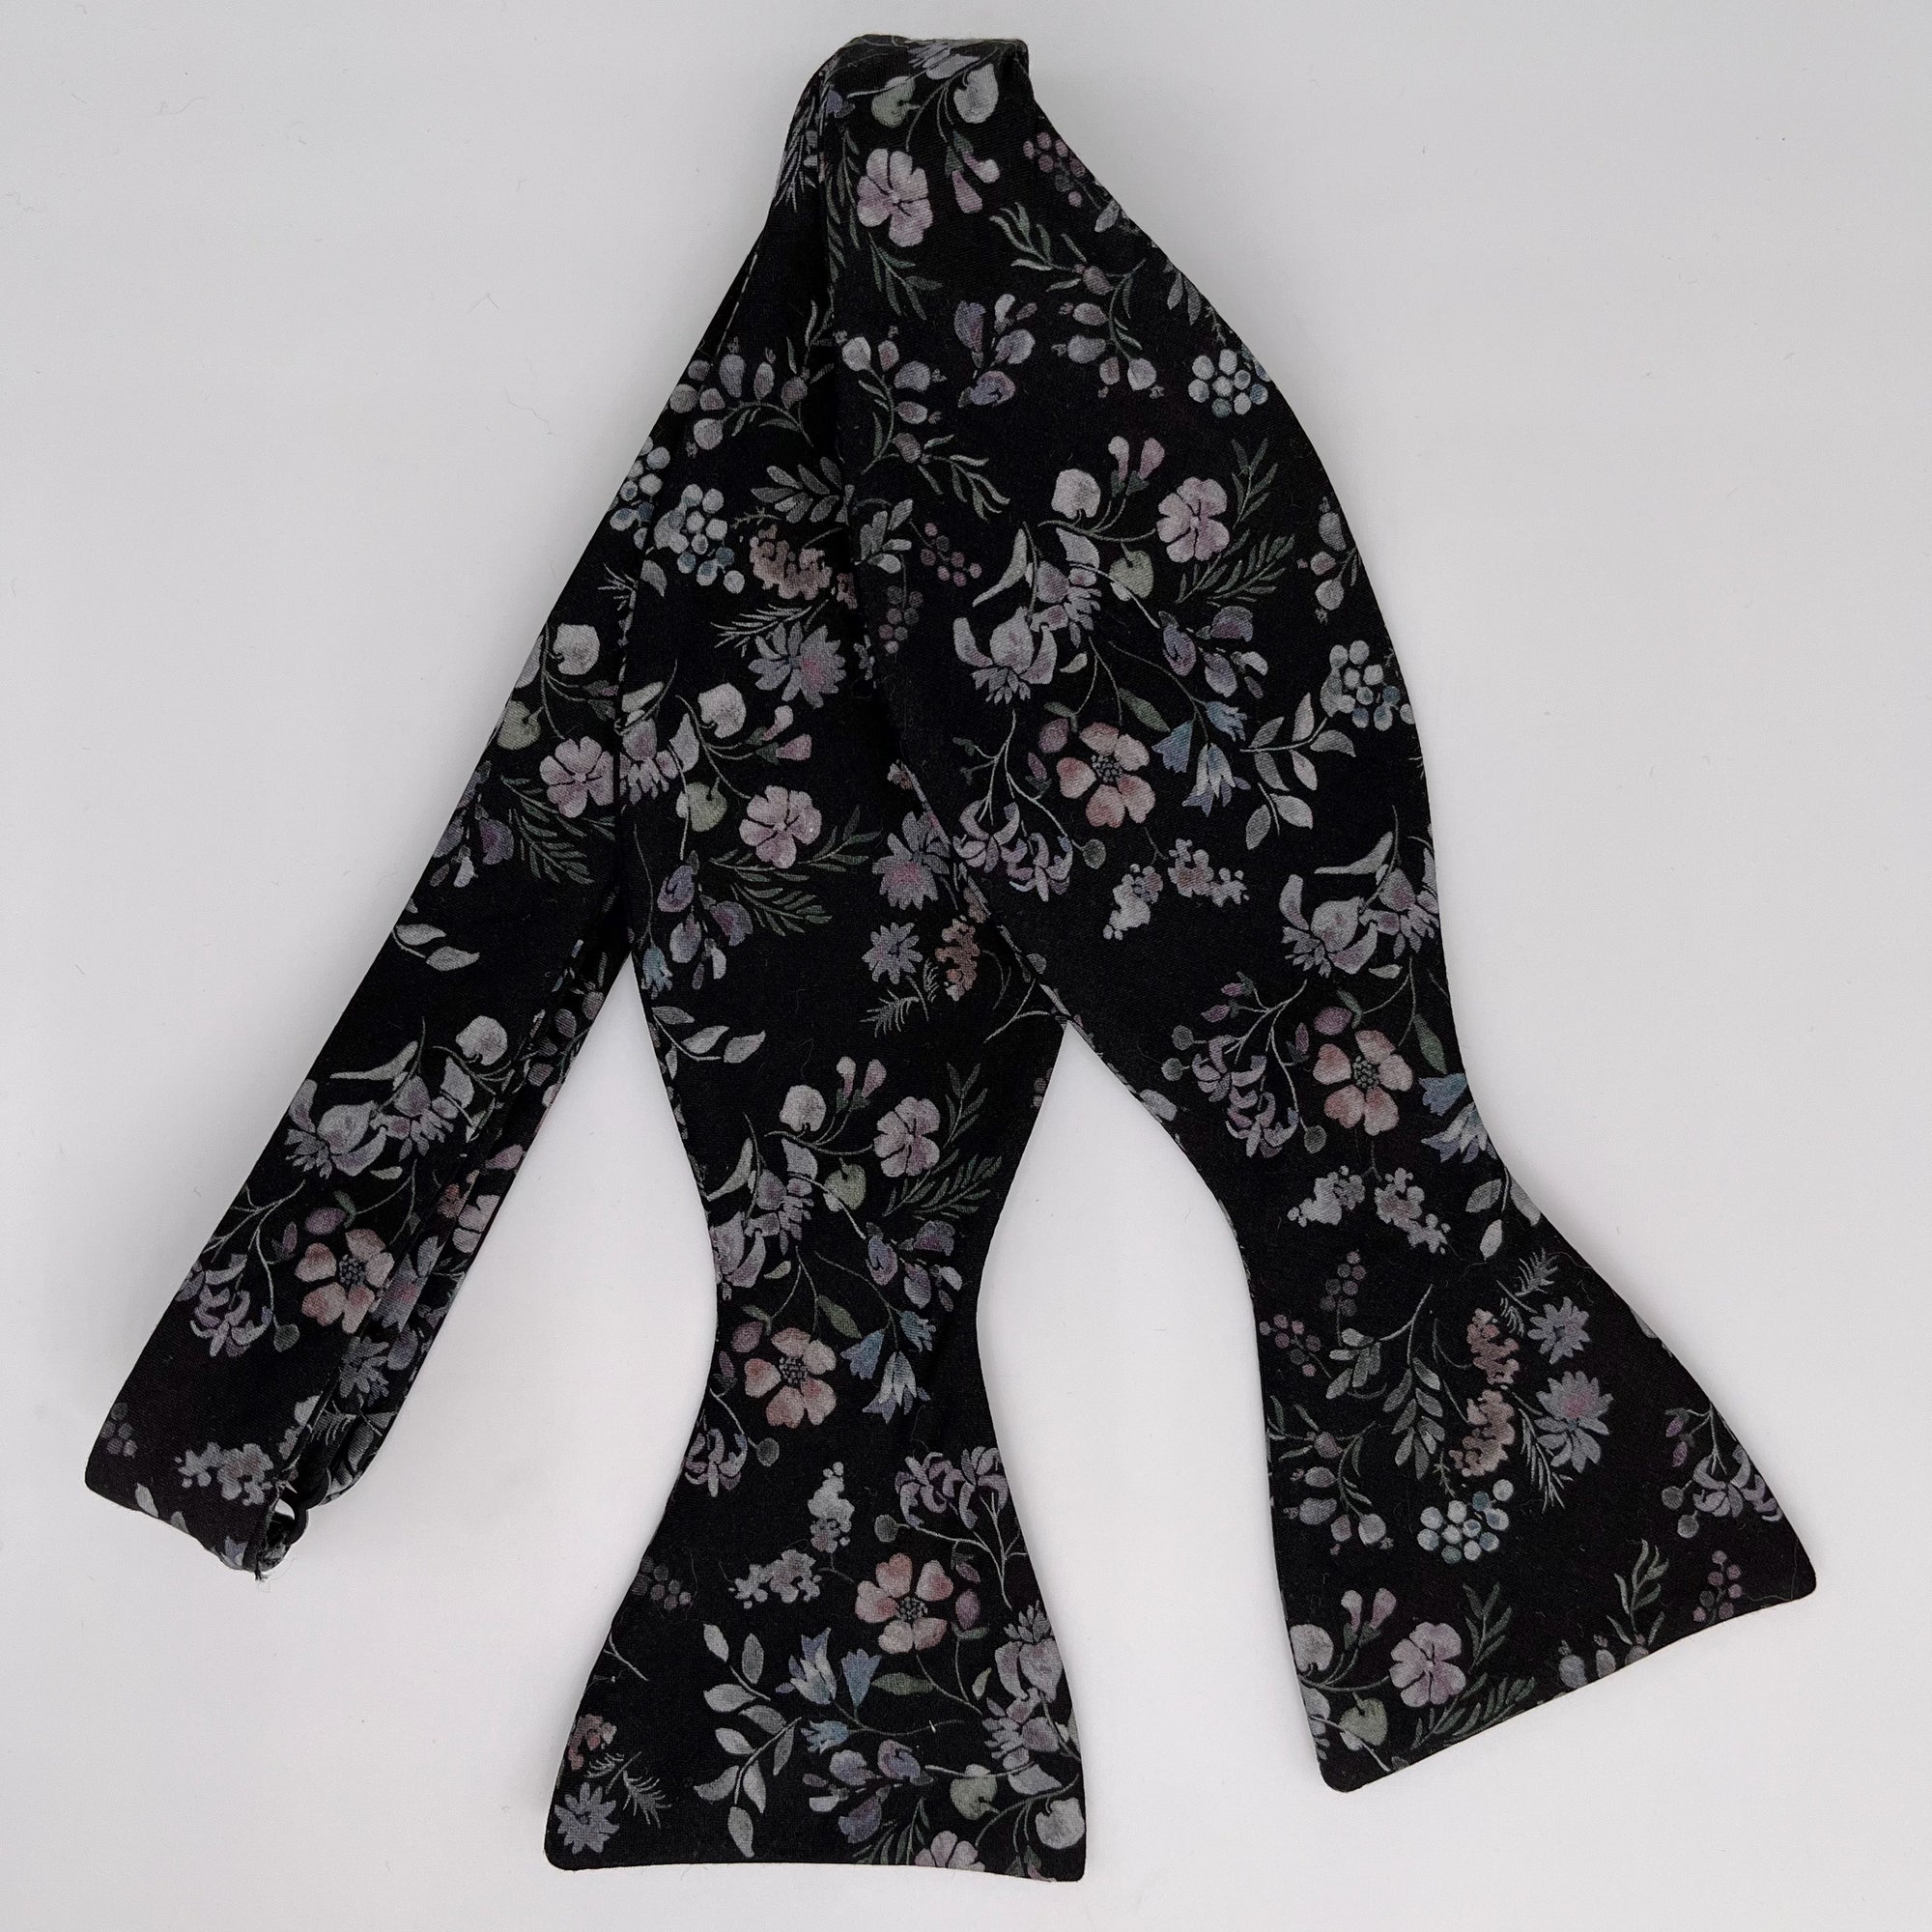 Liberty of London Bow Tie in Black, Mauve & Grey Floral